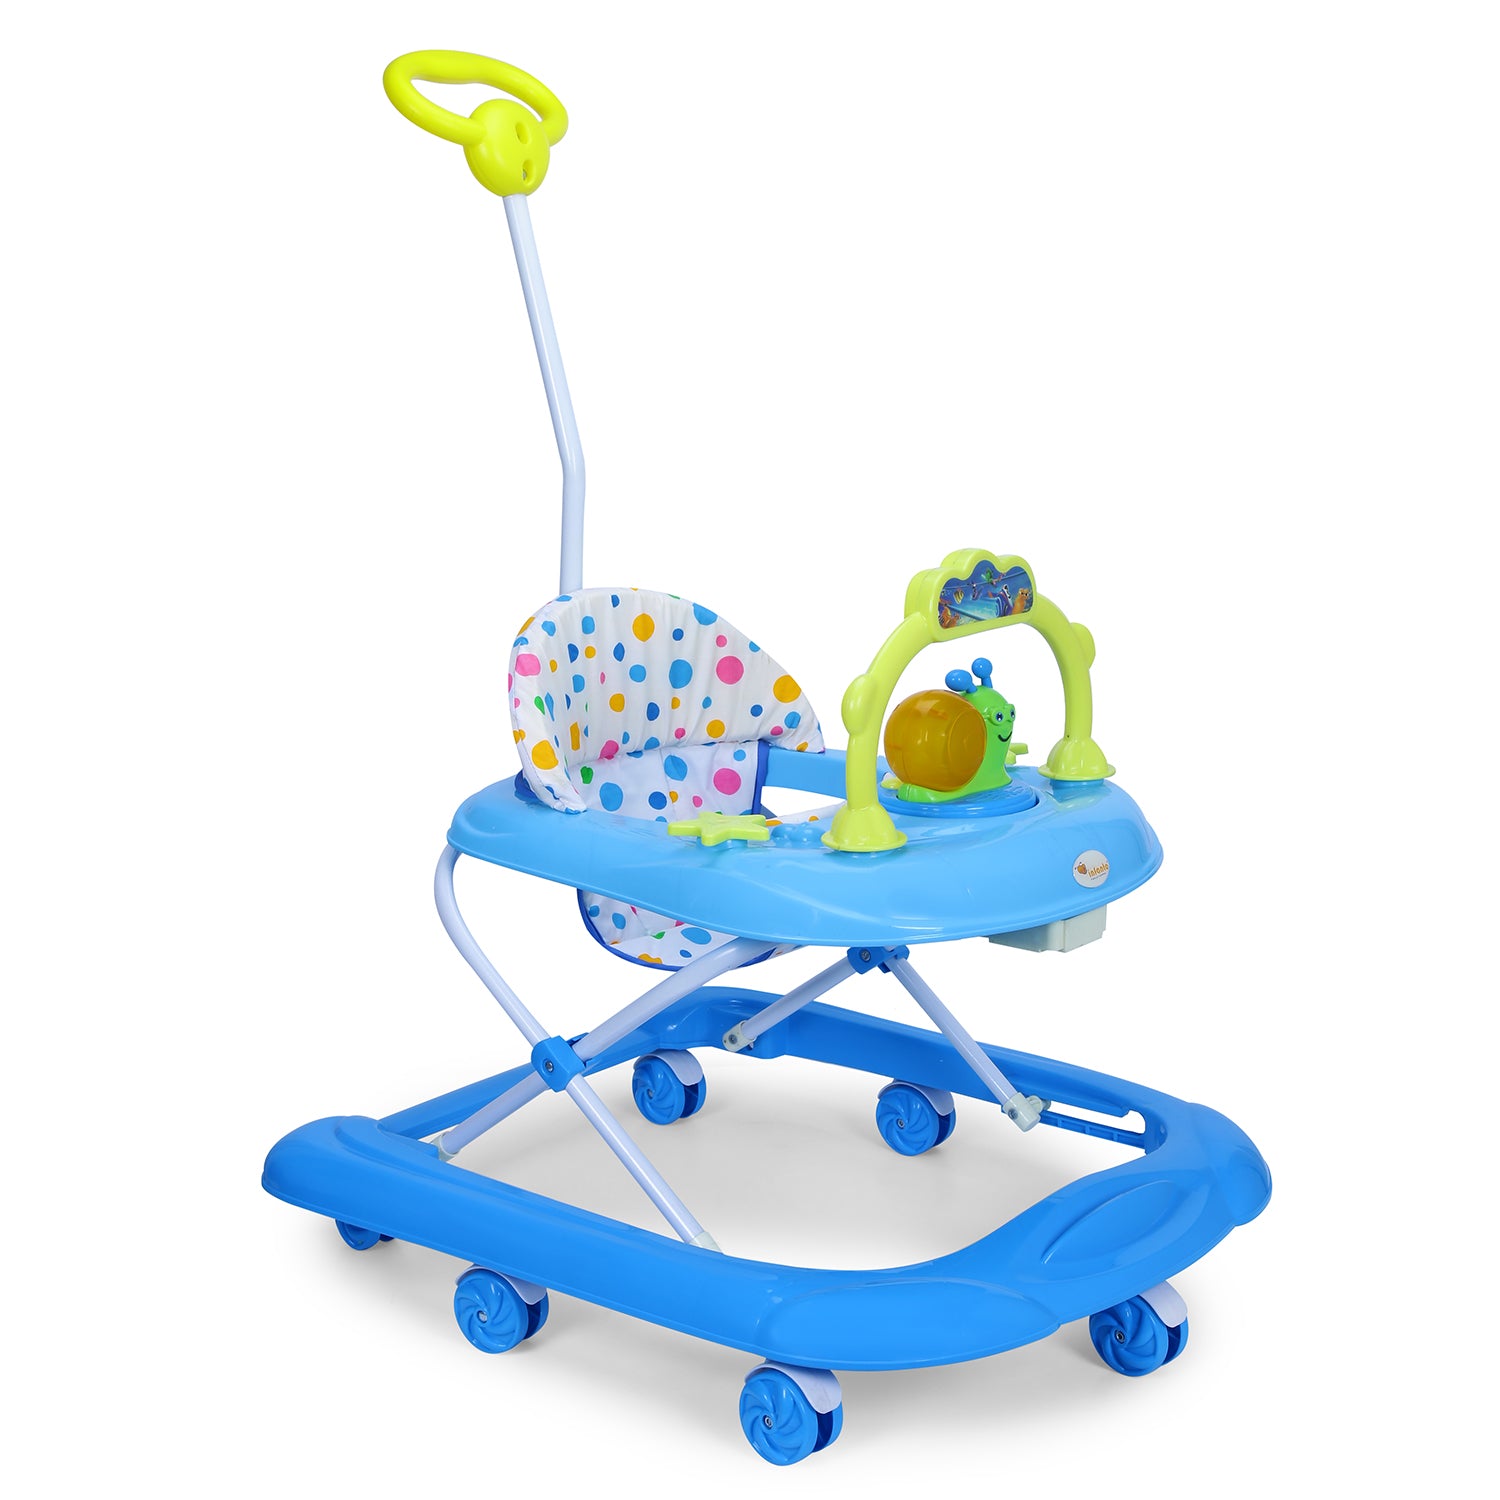 INFANTO Funsteps Musical Baby Walker-Deluxe-BW38A-DLX